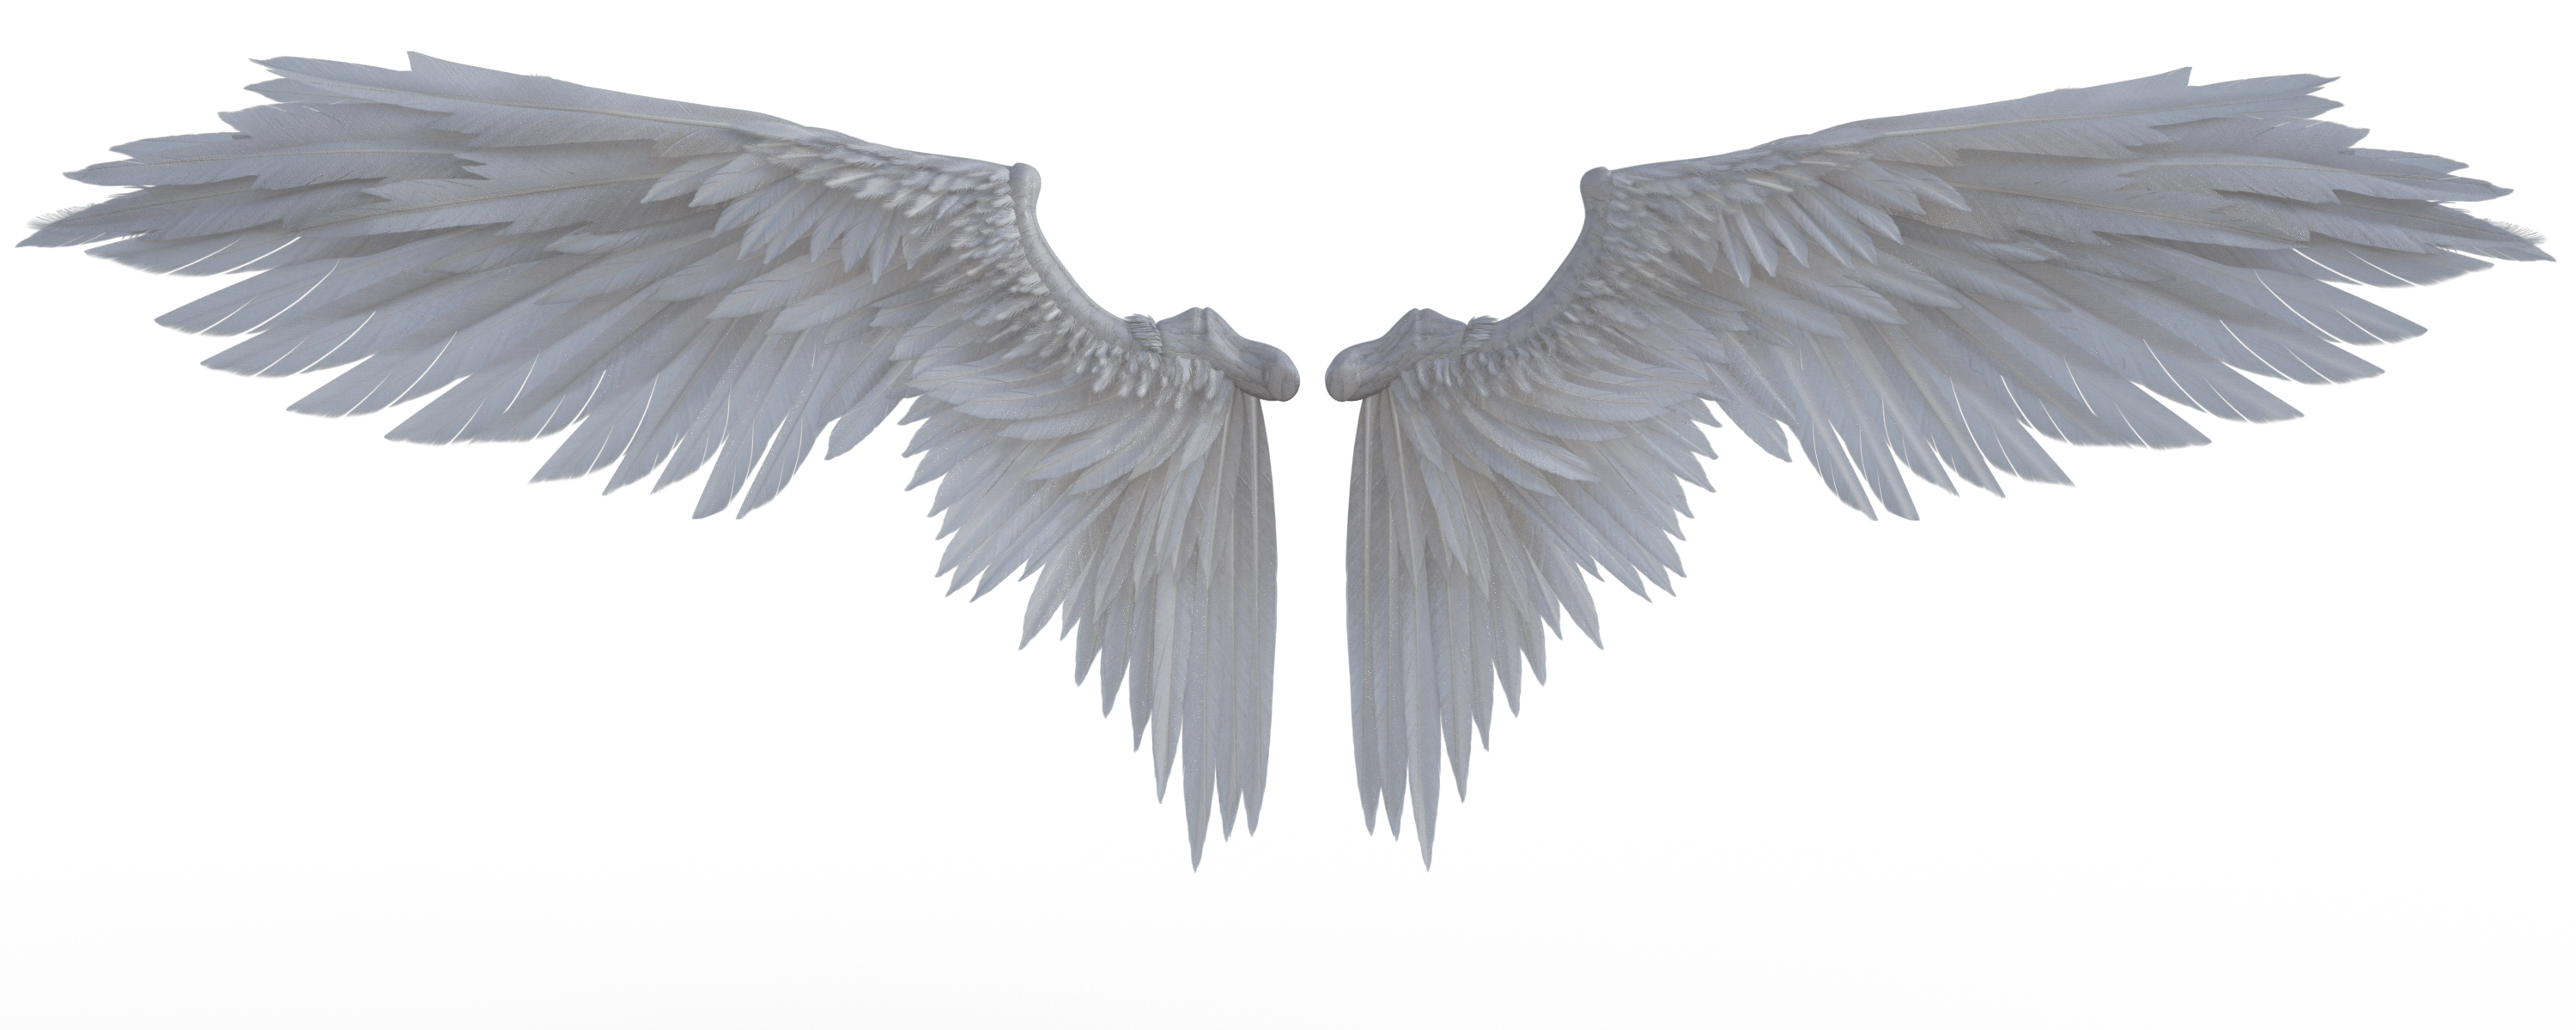 angel-wings-transparent-background-gameznet-25.png